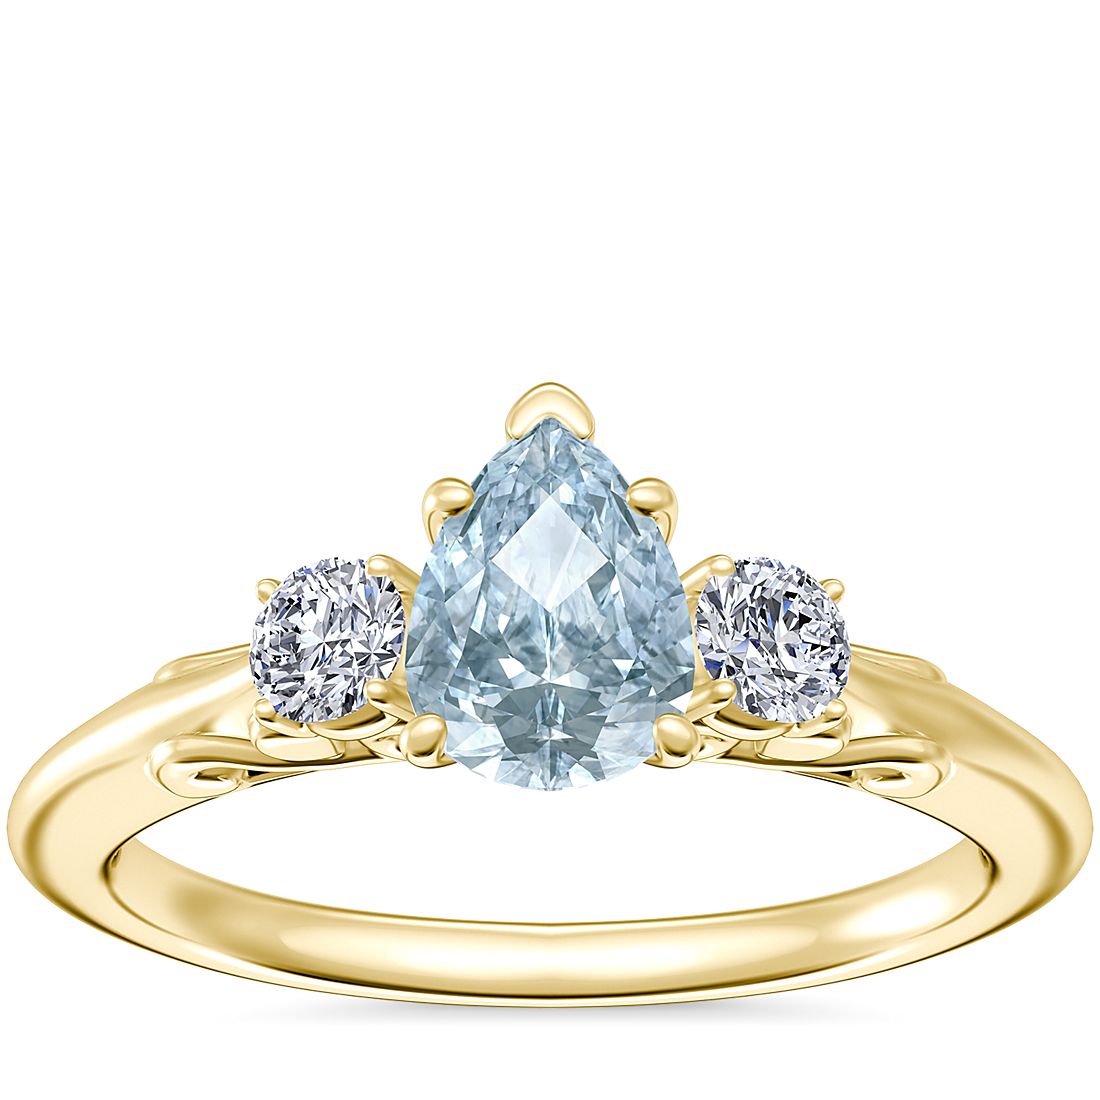 Vintage Three Stone Engagement Ring with Pear-Shaped Aquamarine in 18k Yellow Gold (7x5mm)